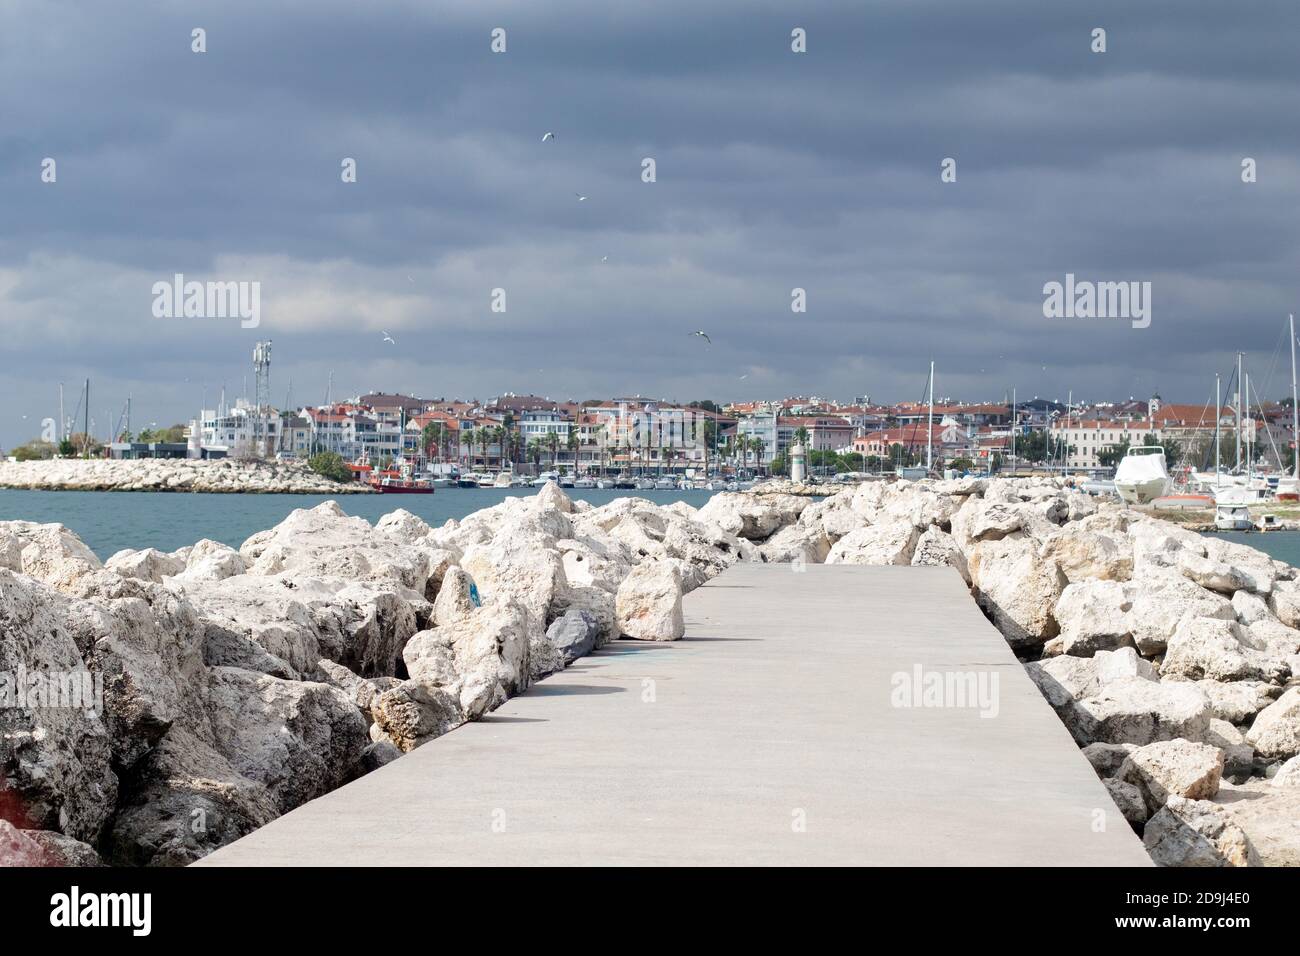 Rock embankment in the sea and pier parking for ships. Thunderous sky and seagulls Stock Photo